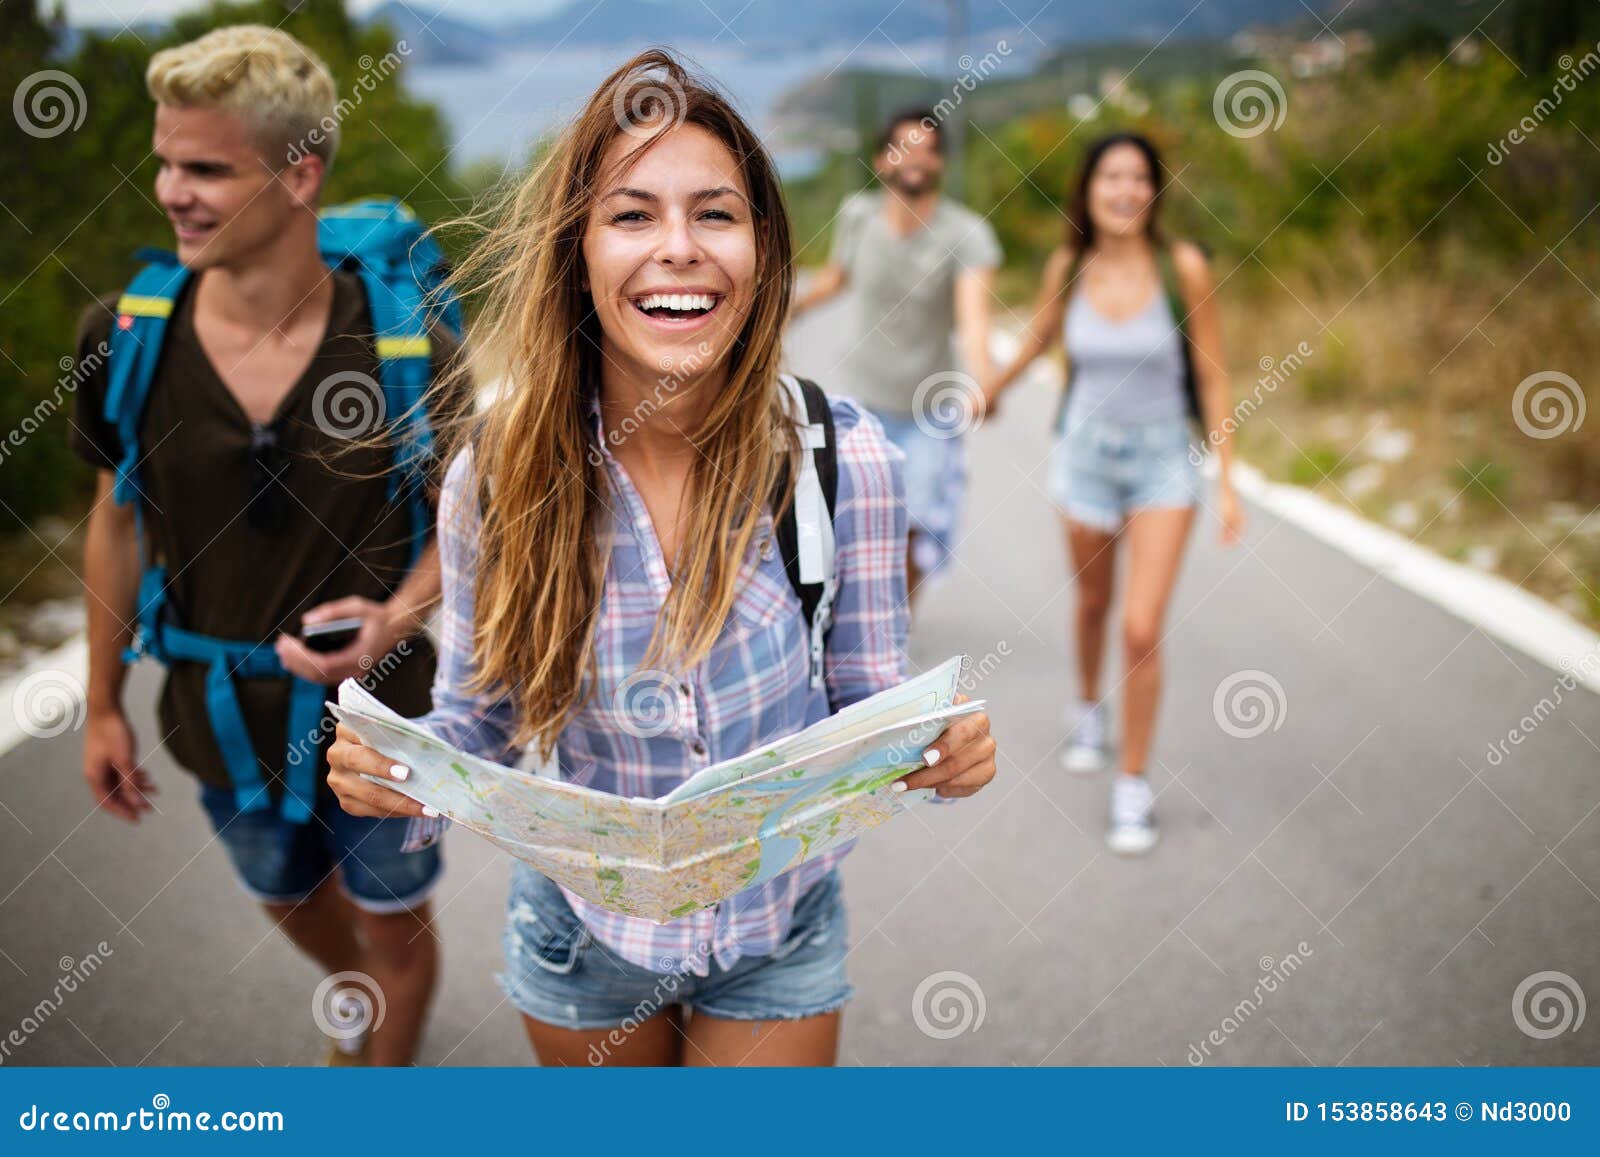 adventure, travel, tourism and people concept - group of smiling friends with backpacks and map